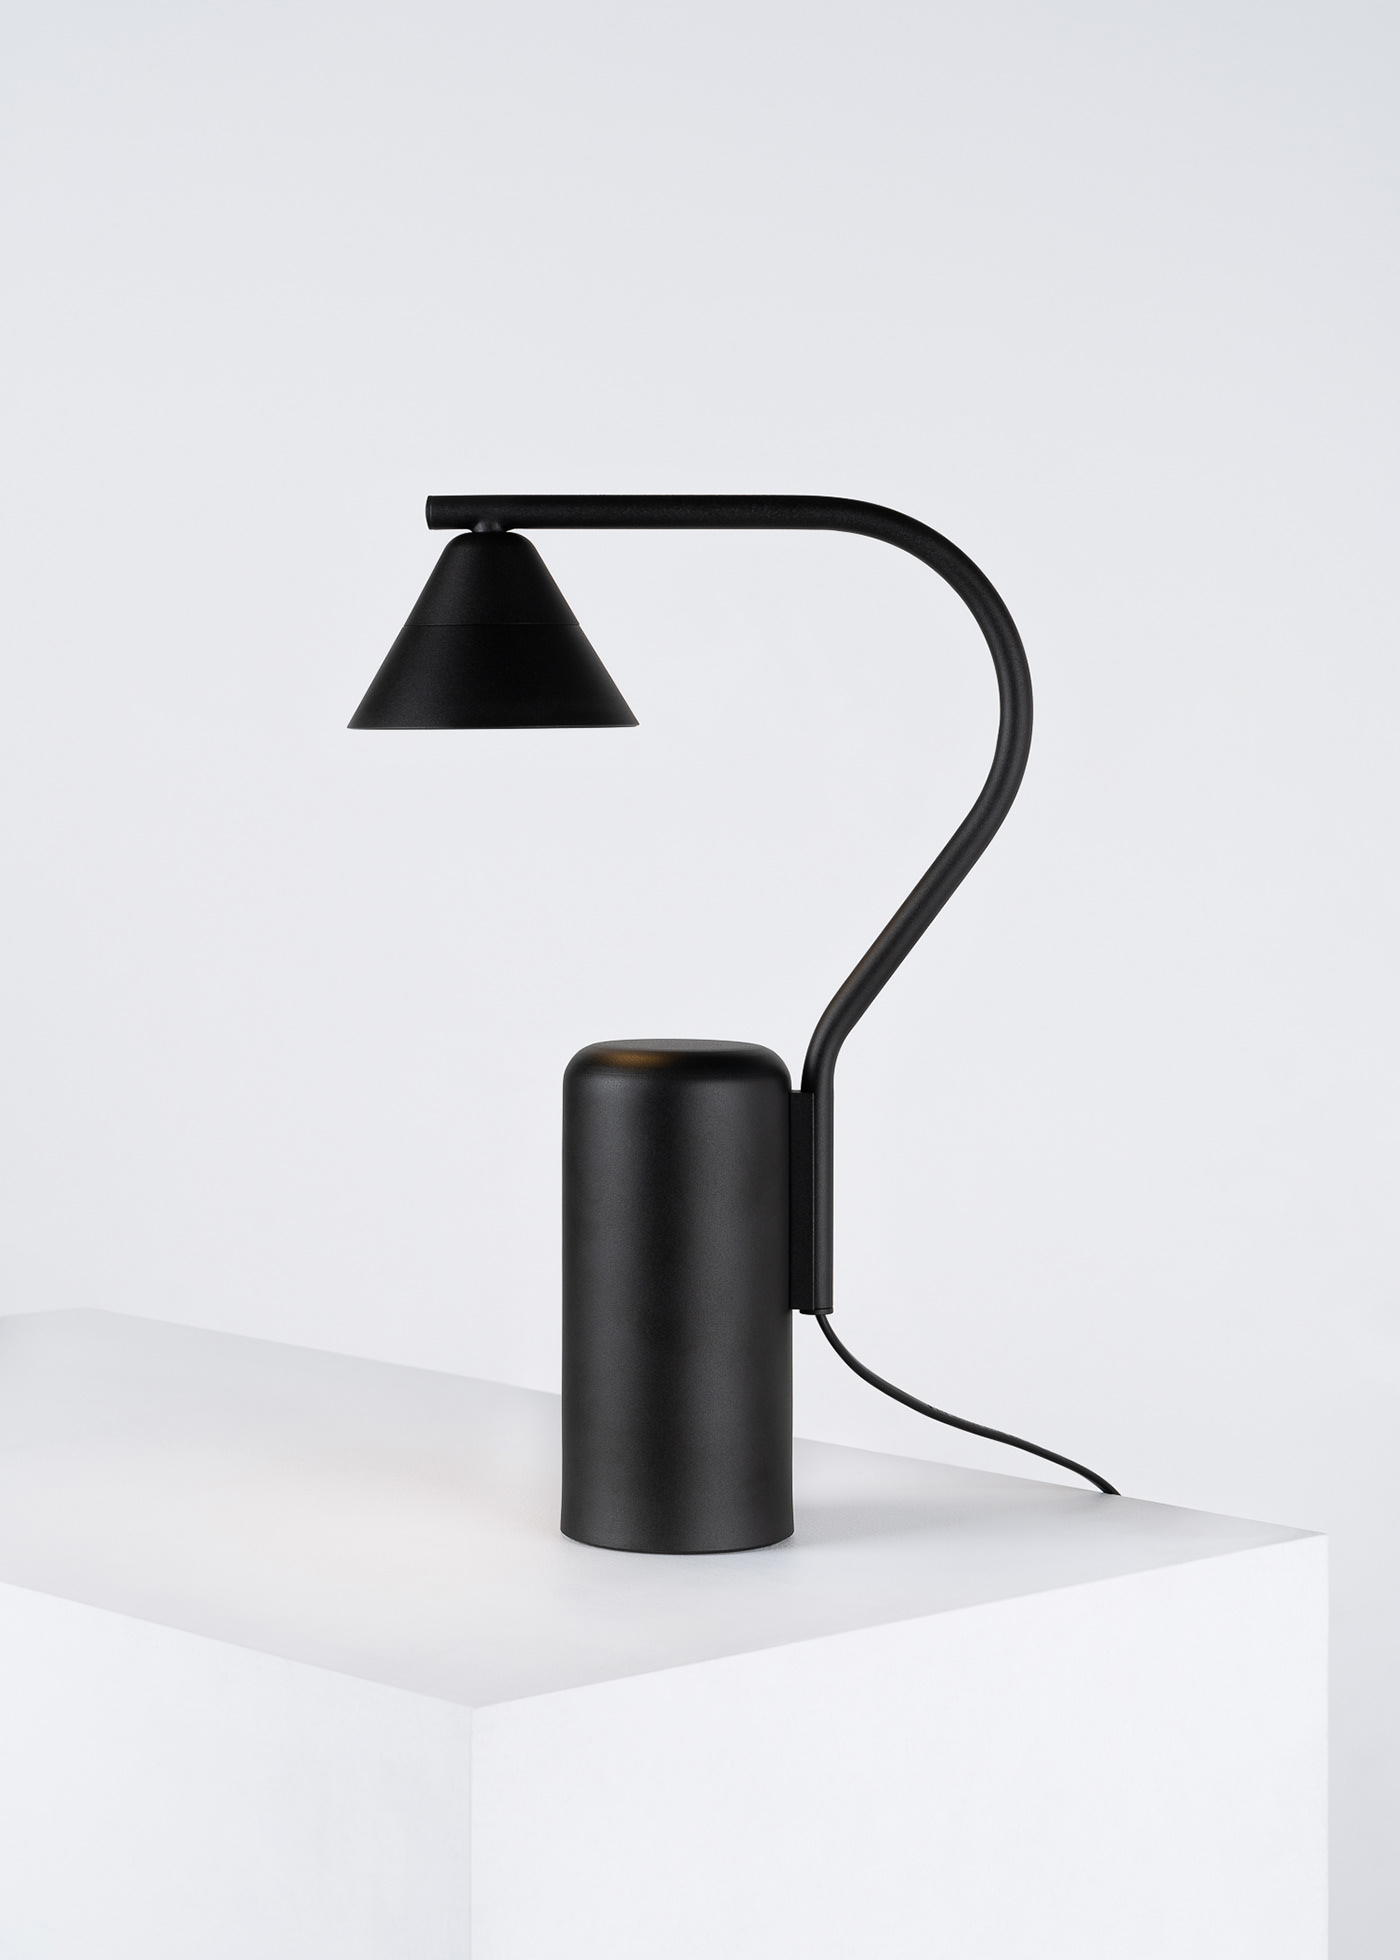 BIRD Lamp by SWNA for Liberal Office - Gessato